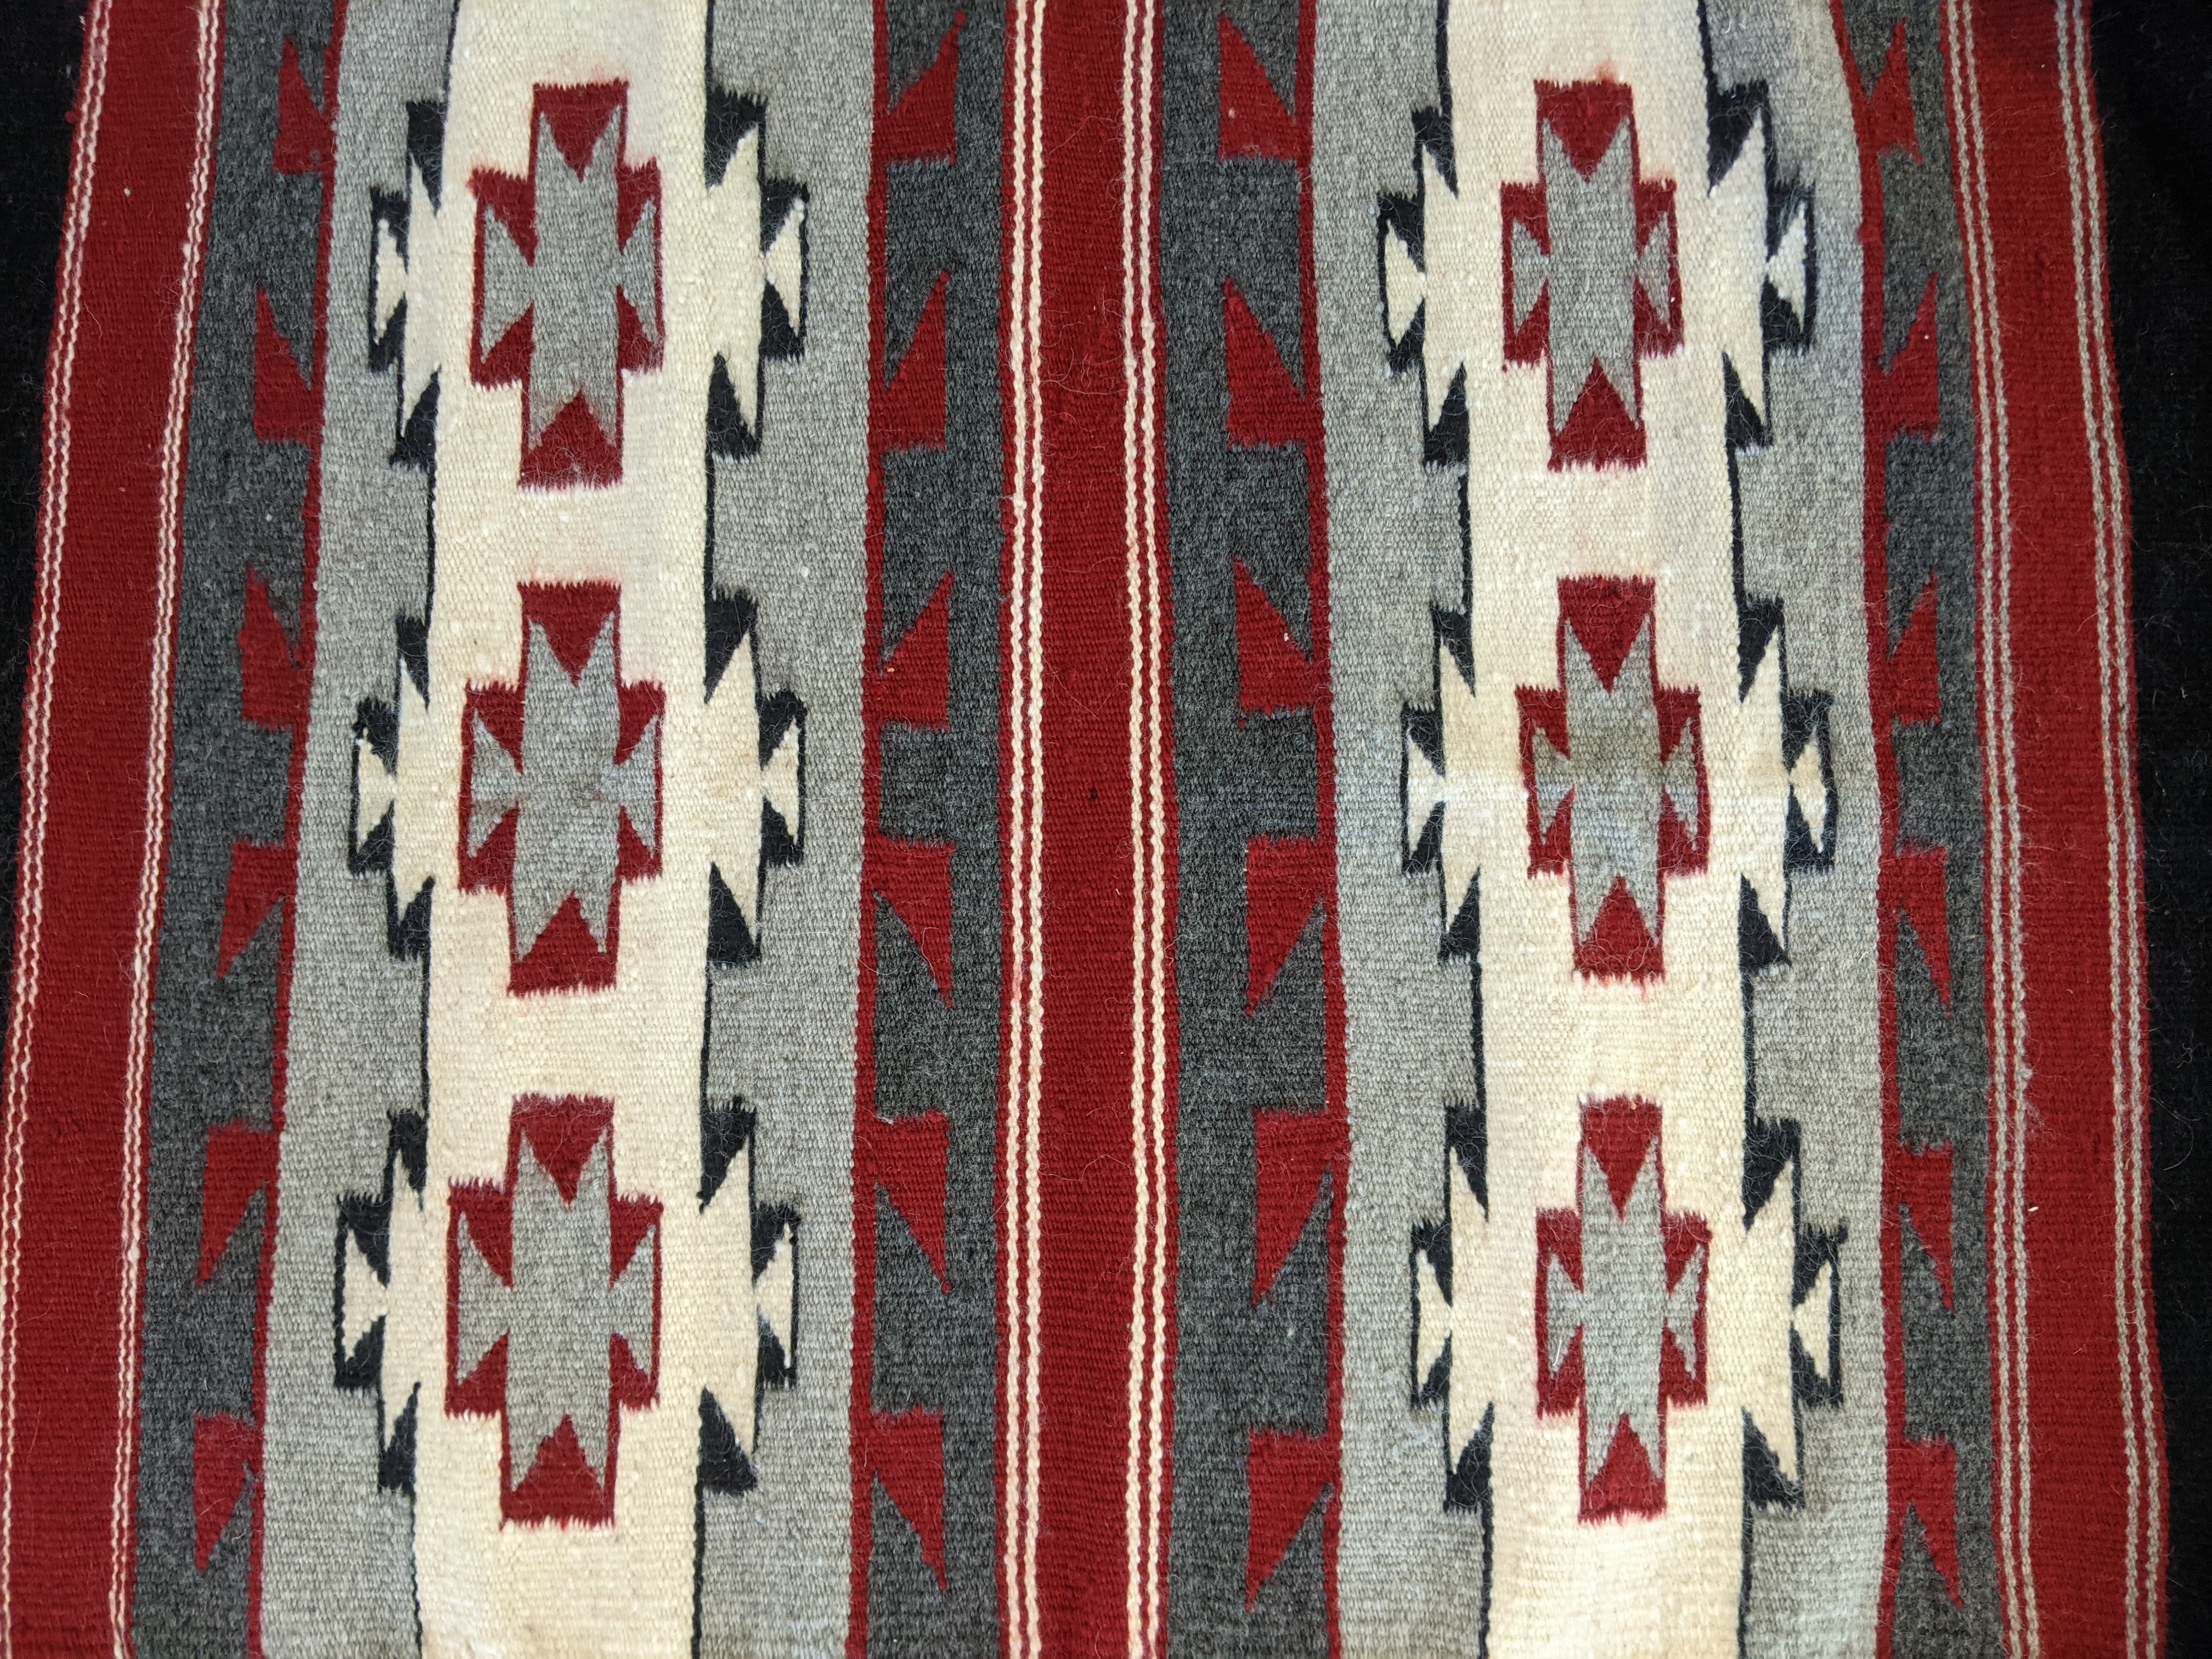 Detail of rug with red, white, gray, and black stripes and geometric patterns